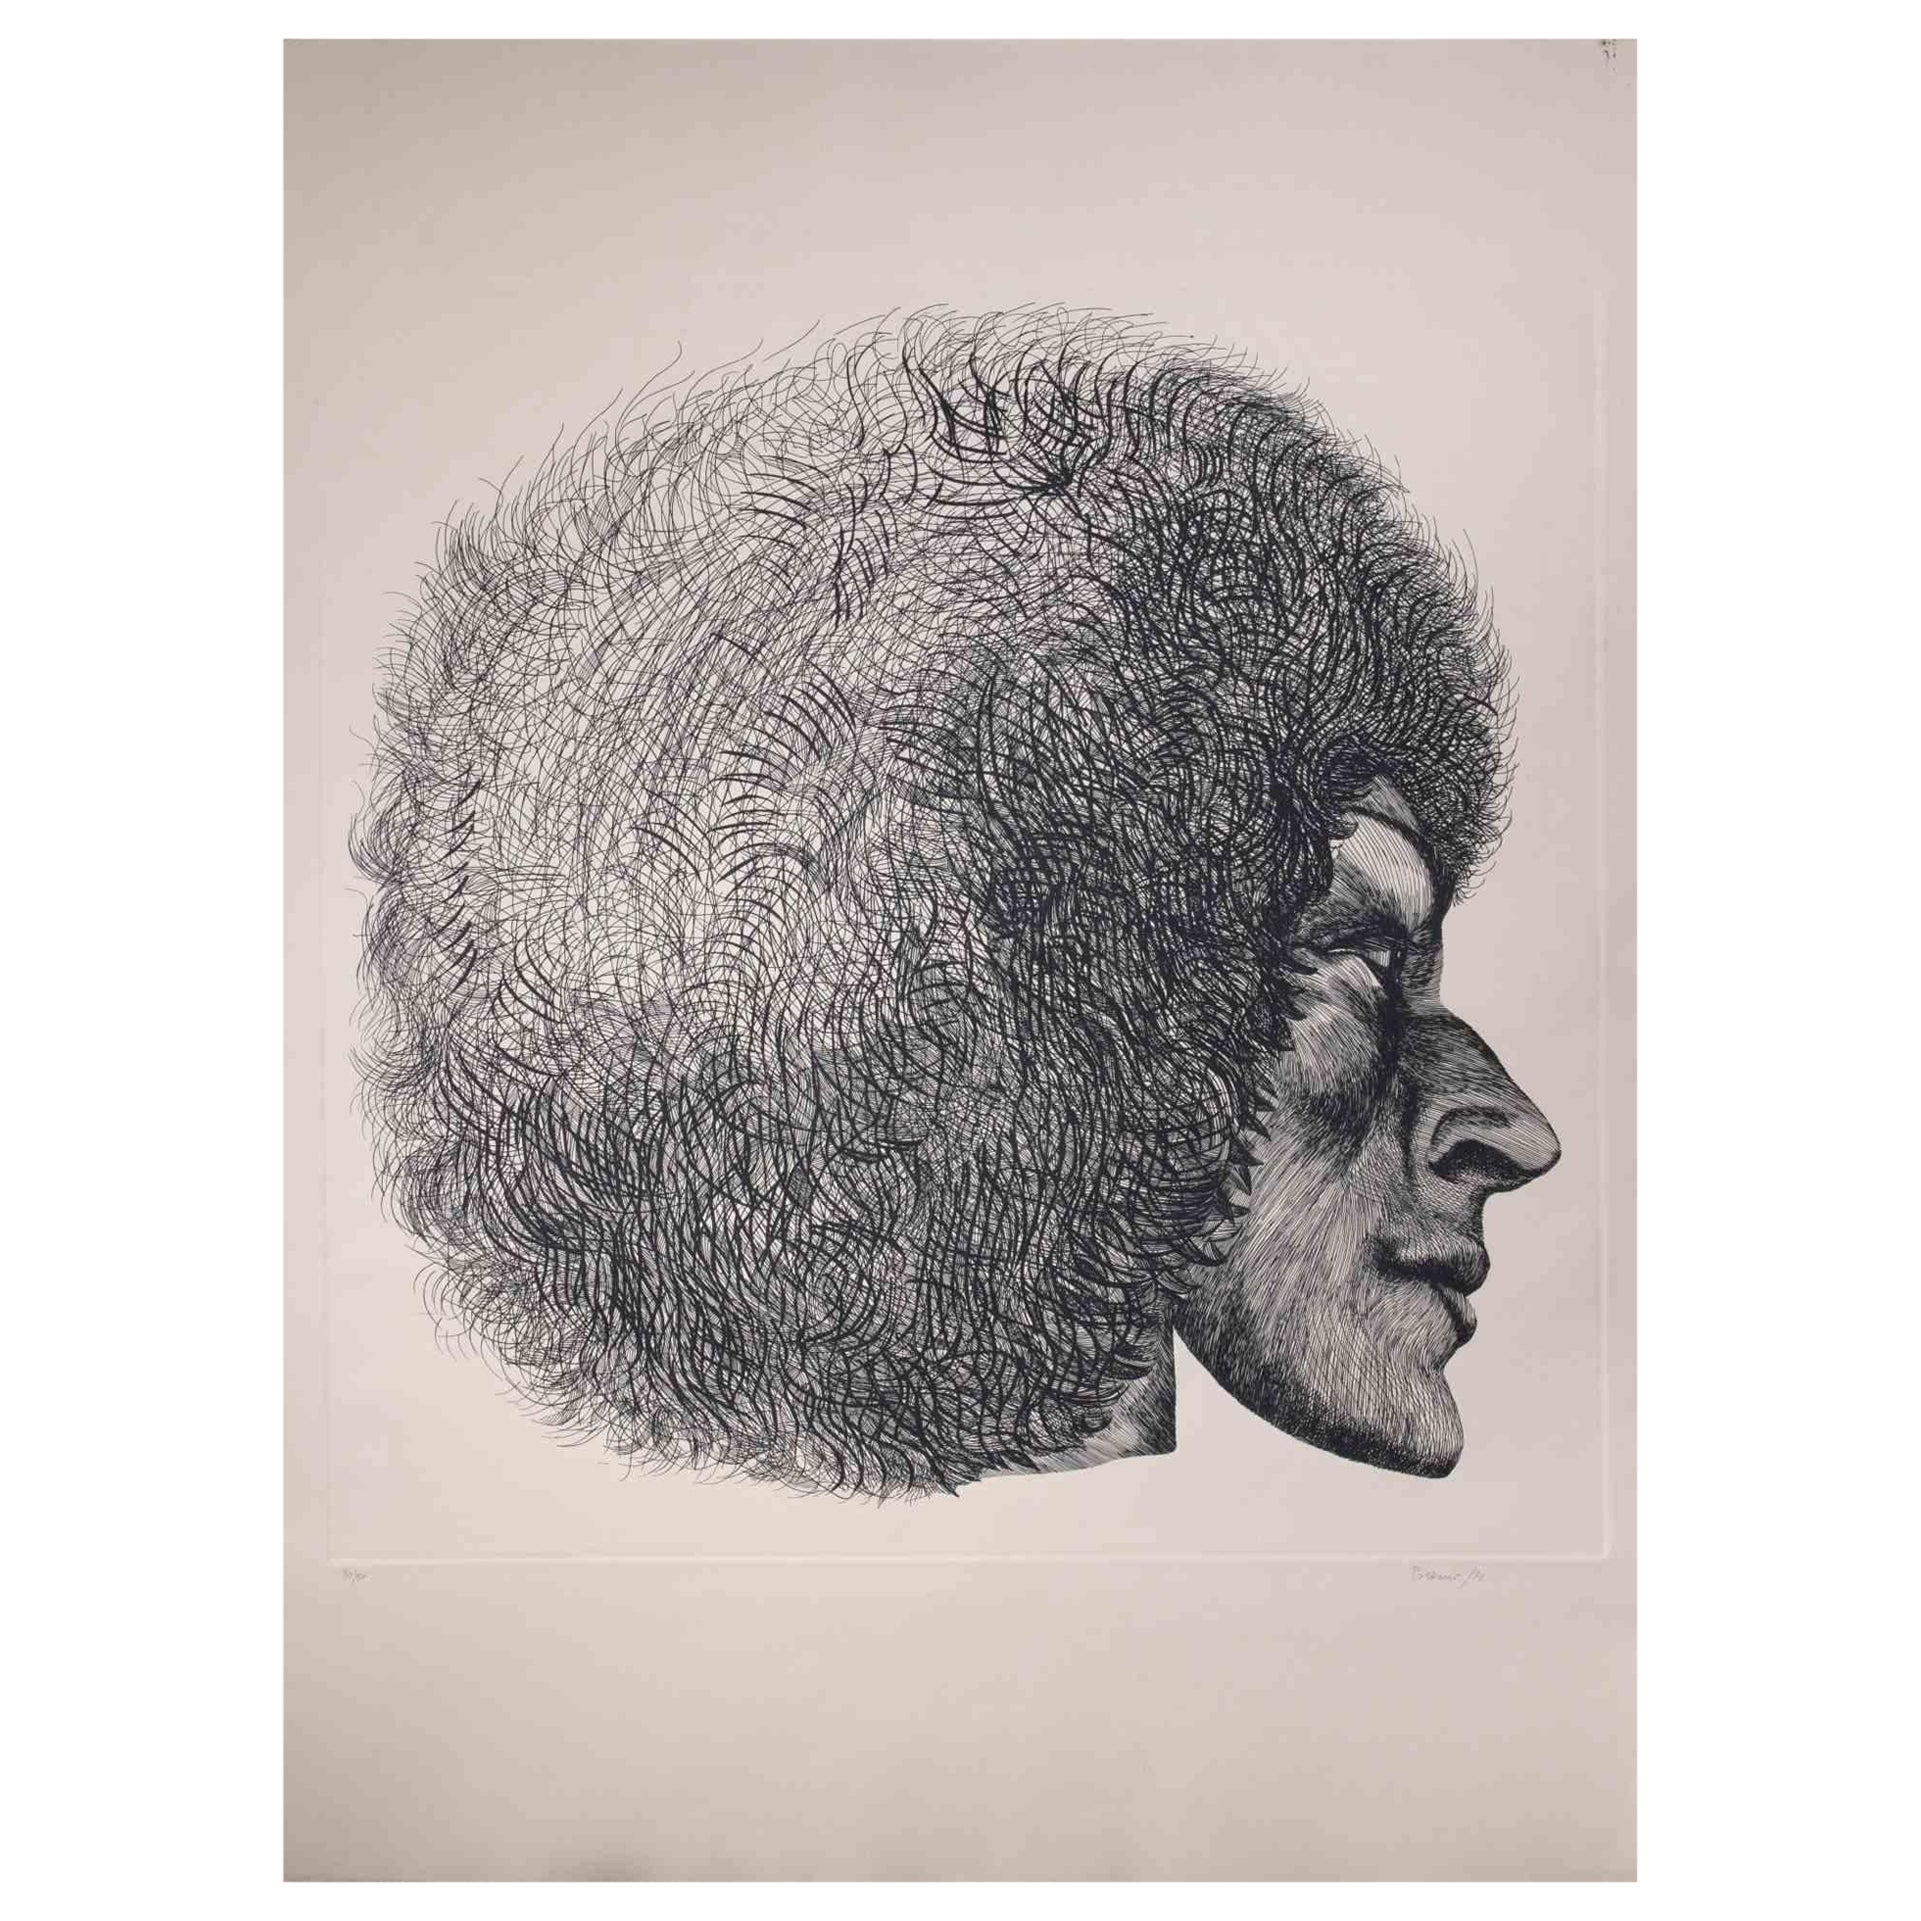 Profile is an original modern artowork realized by the Italian artist Giacomo Porzano (1925-2006) in 1972.

Black and white etching.

Hand-signed and dated on the lower right.

Numbered on the lower left. Edition of 30/50.


Giacomo Porzano was born